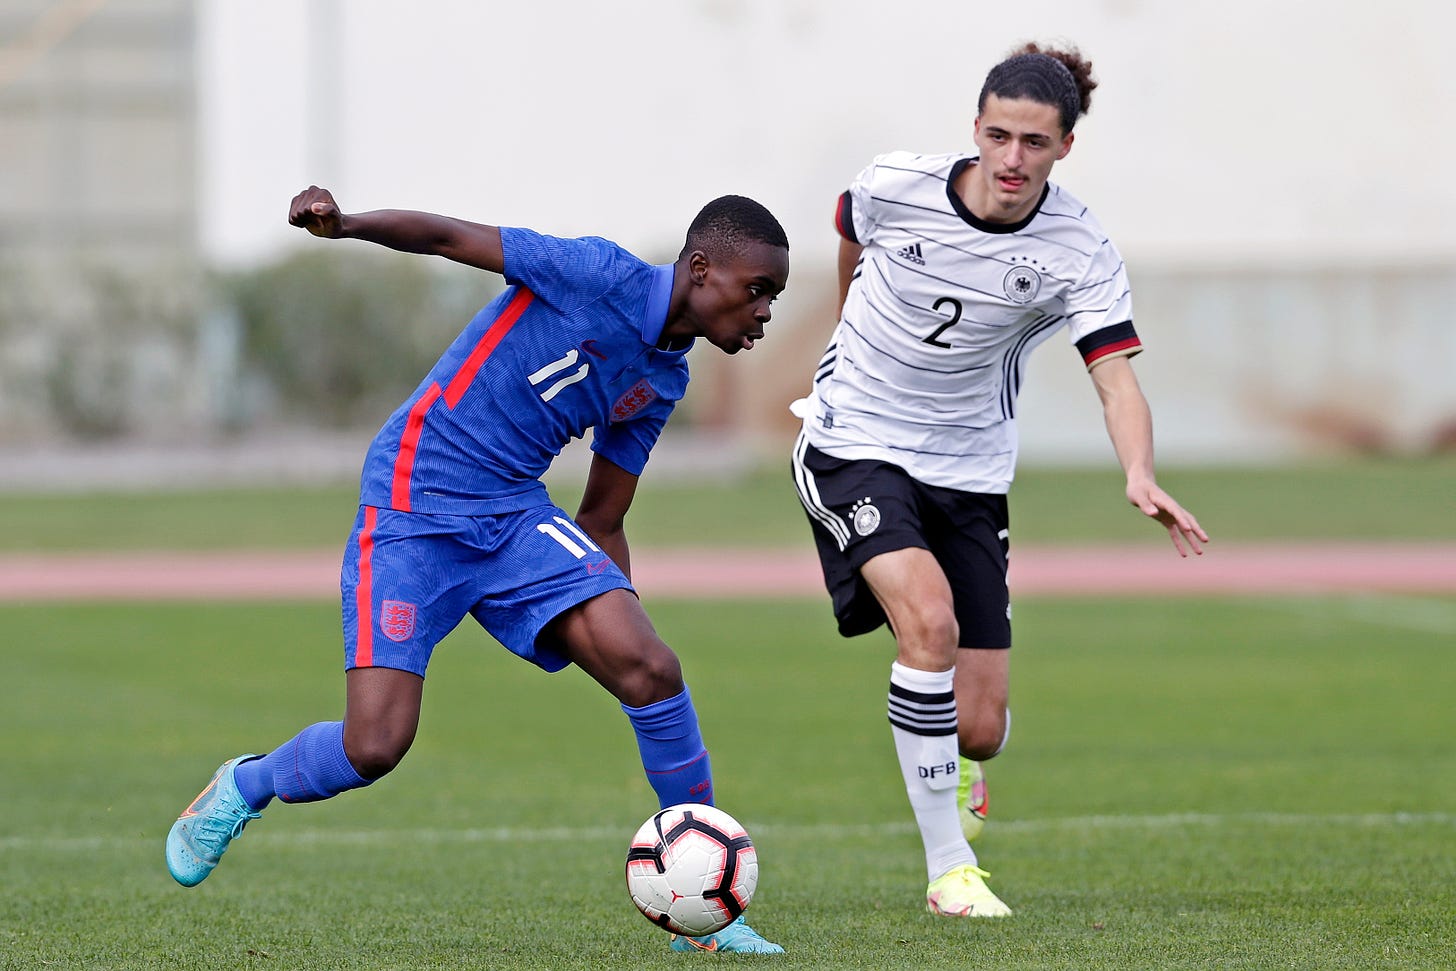 Tyrique George pictured (left) playing for England against Germany in a U16 international in February 2022